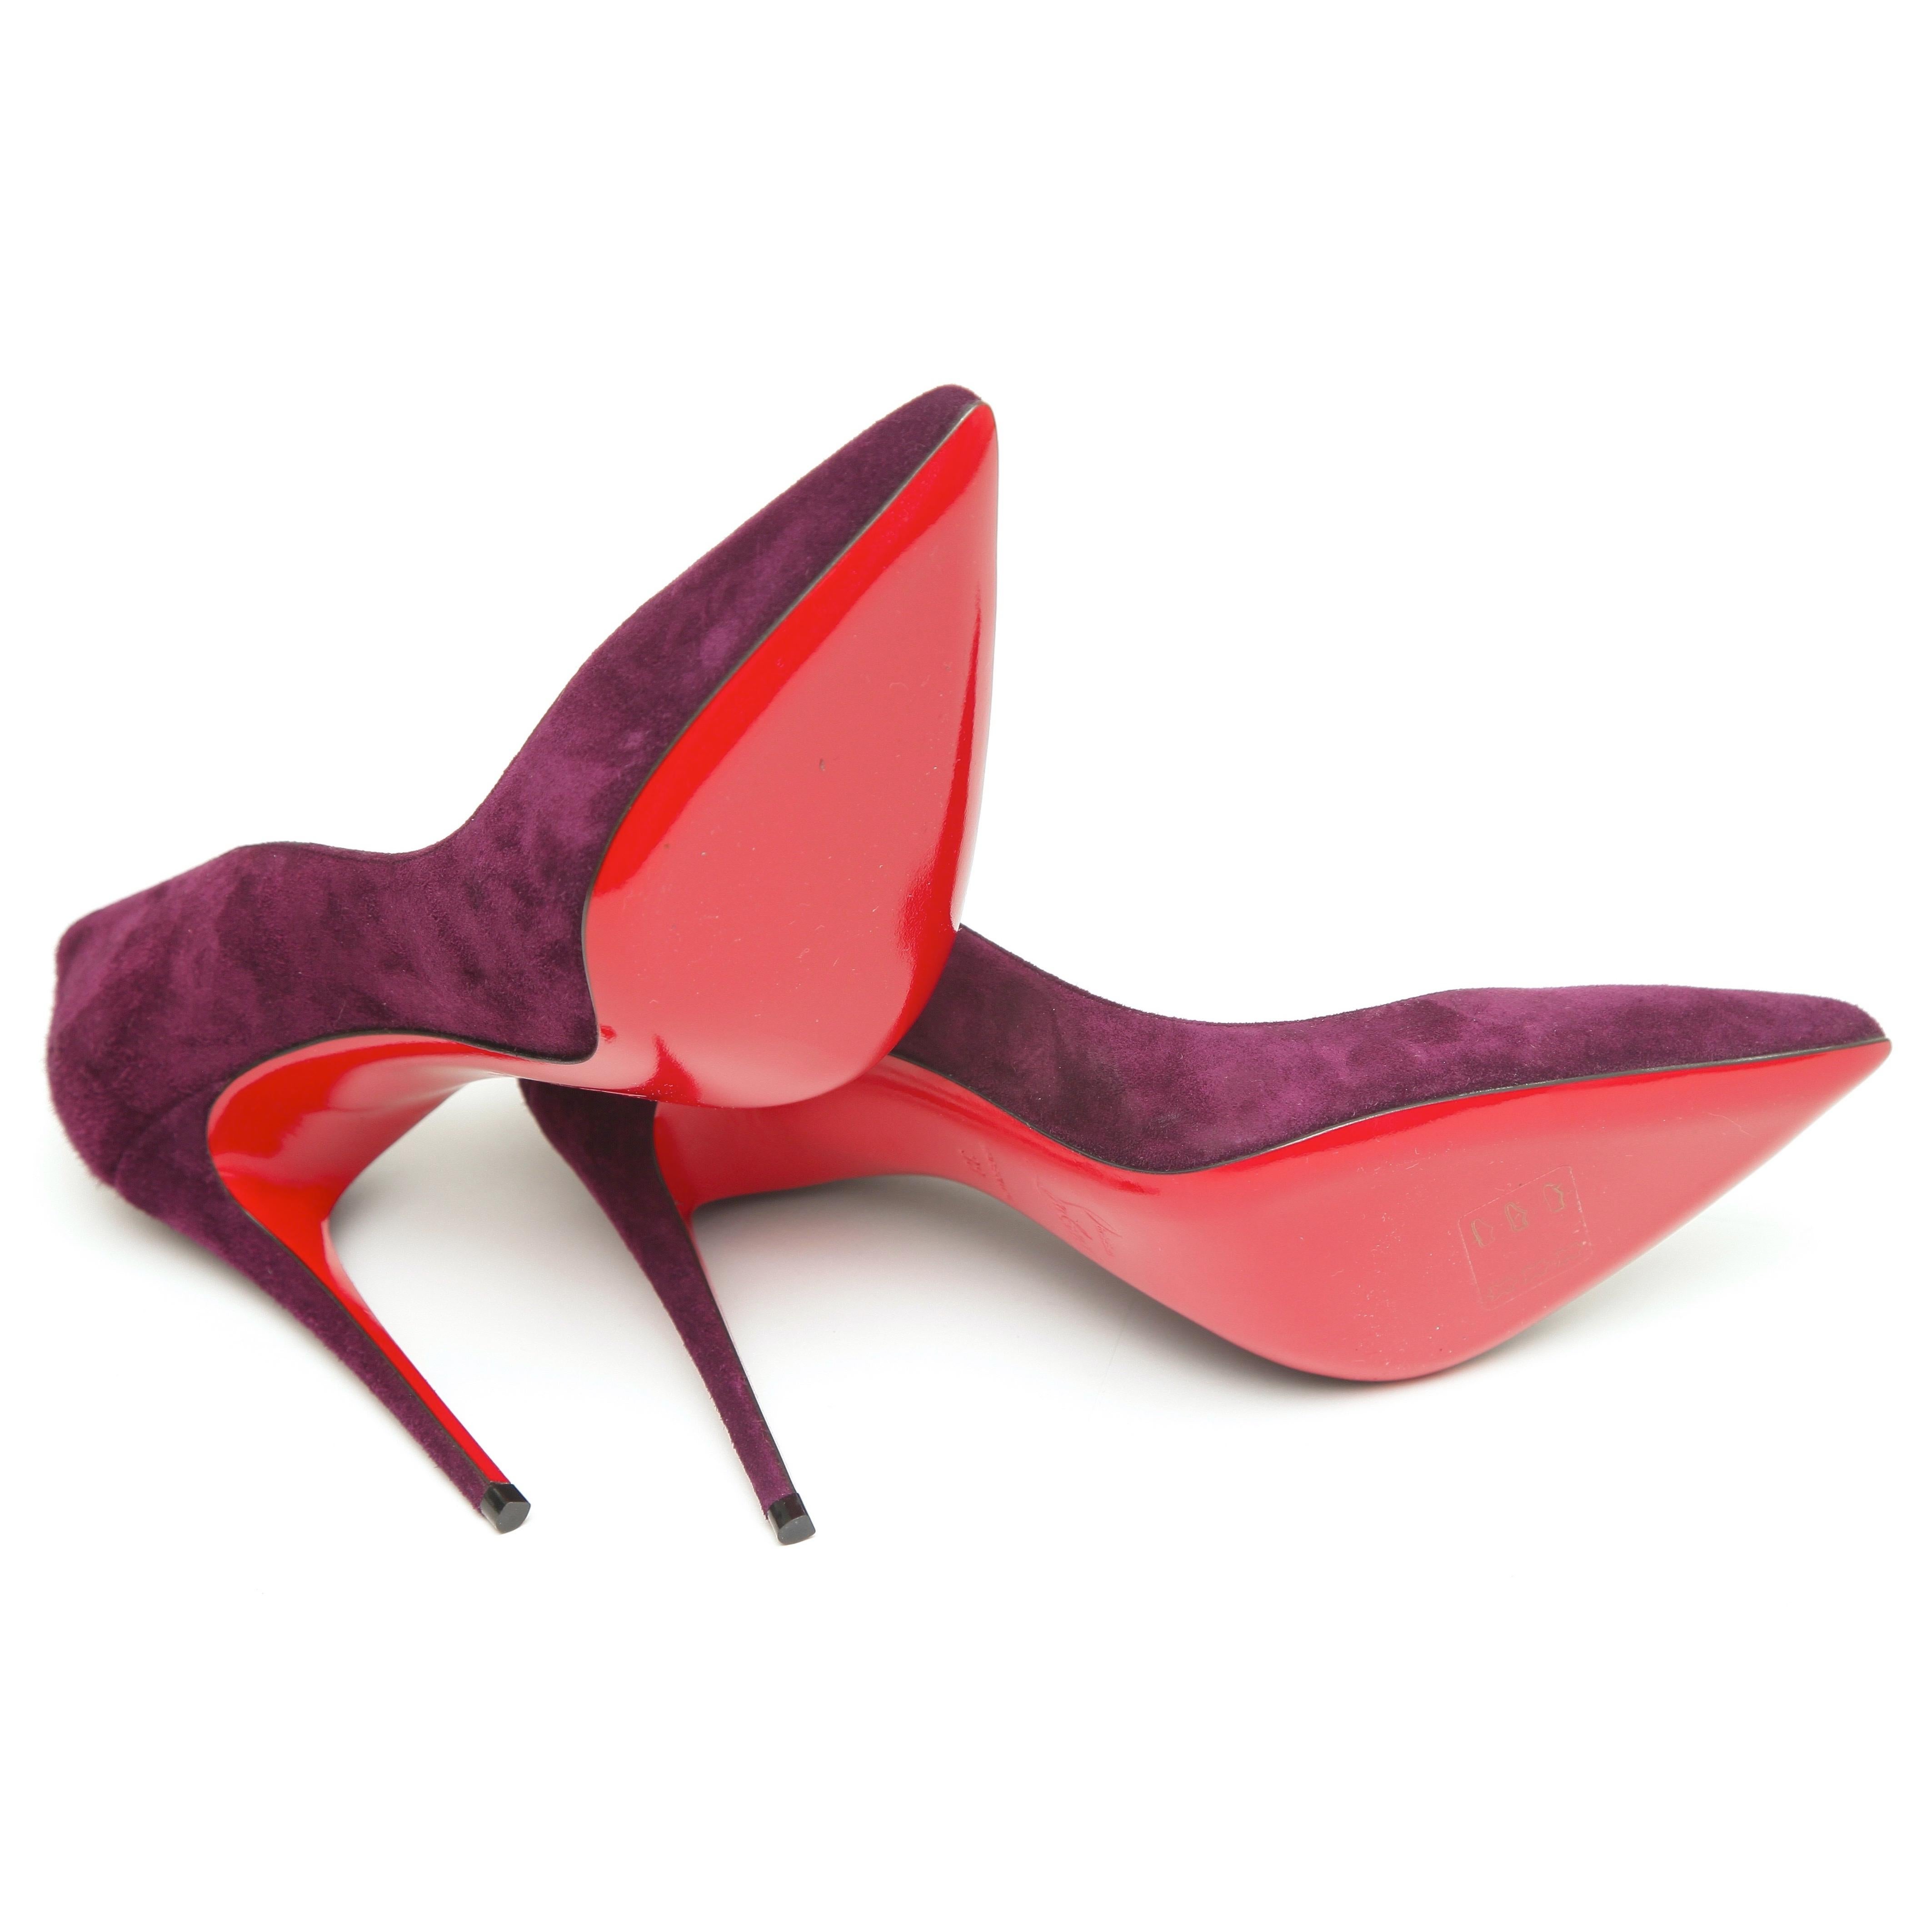 CHRISTIAN LOUBOUTIN Purple Suede Pump SO KATE 100 Pointed Toe 38 NEW 2